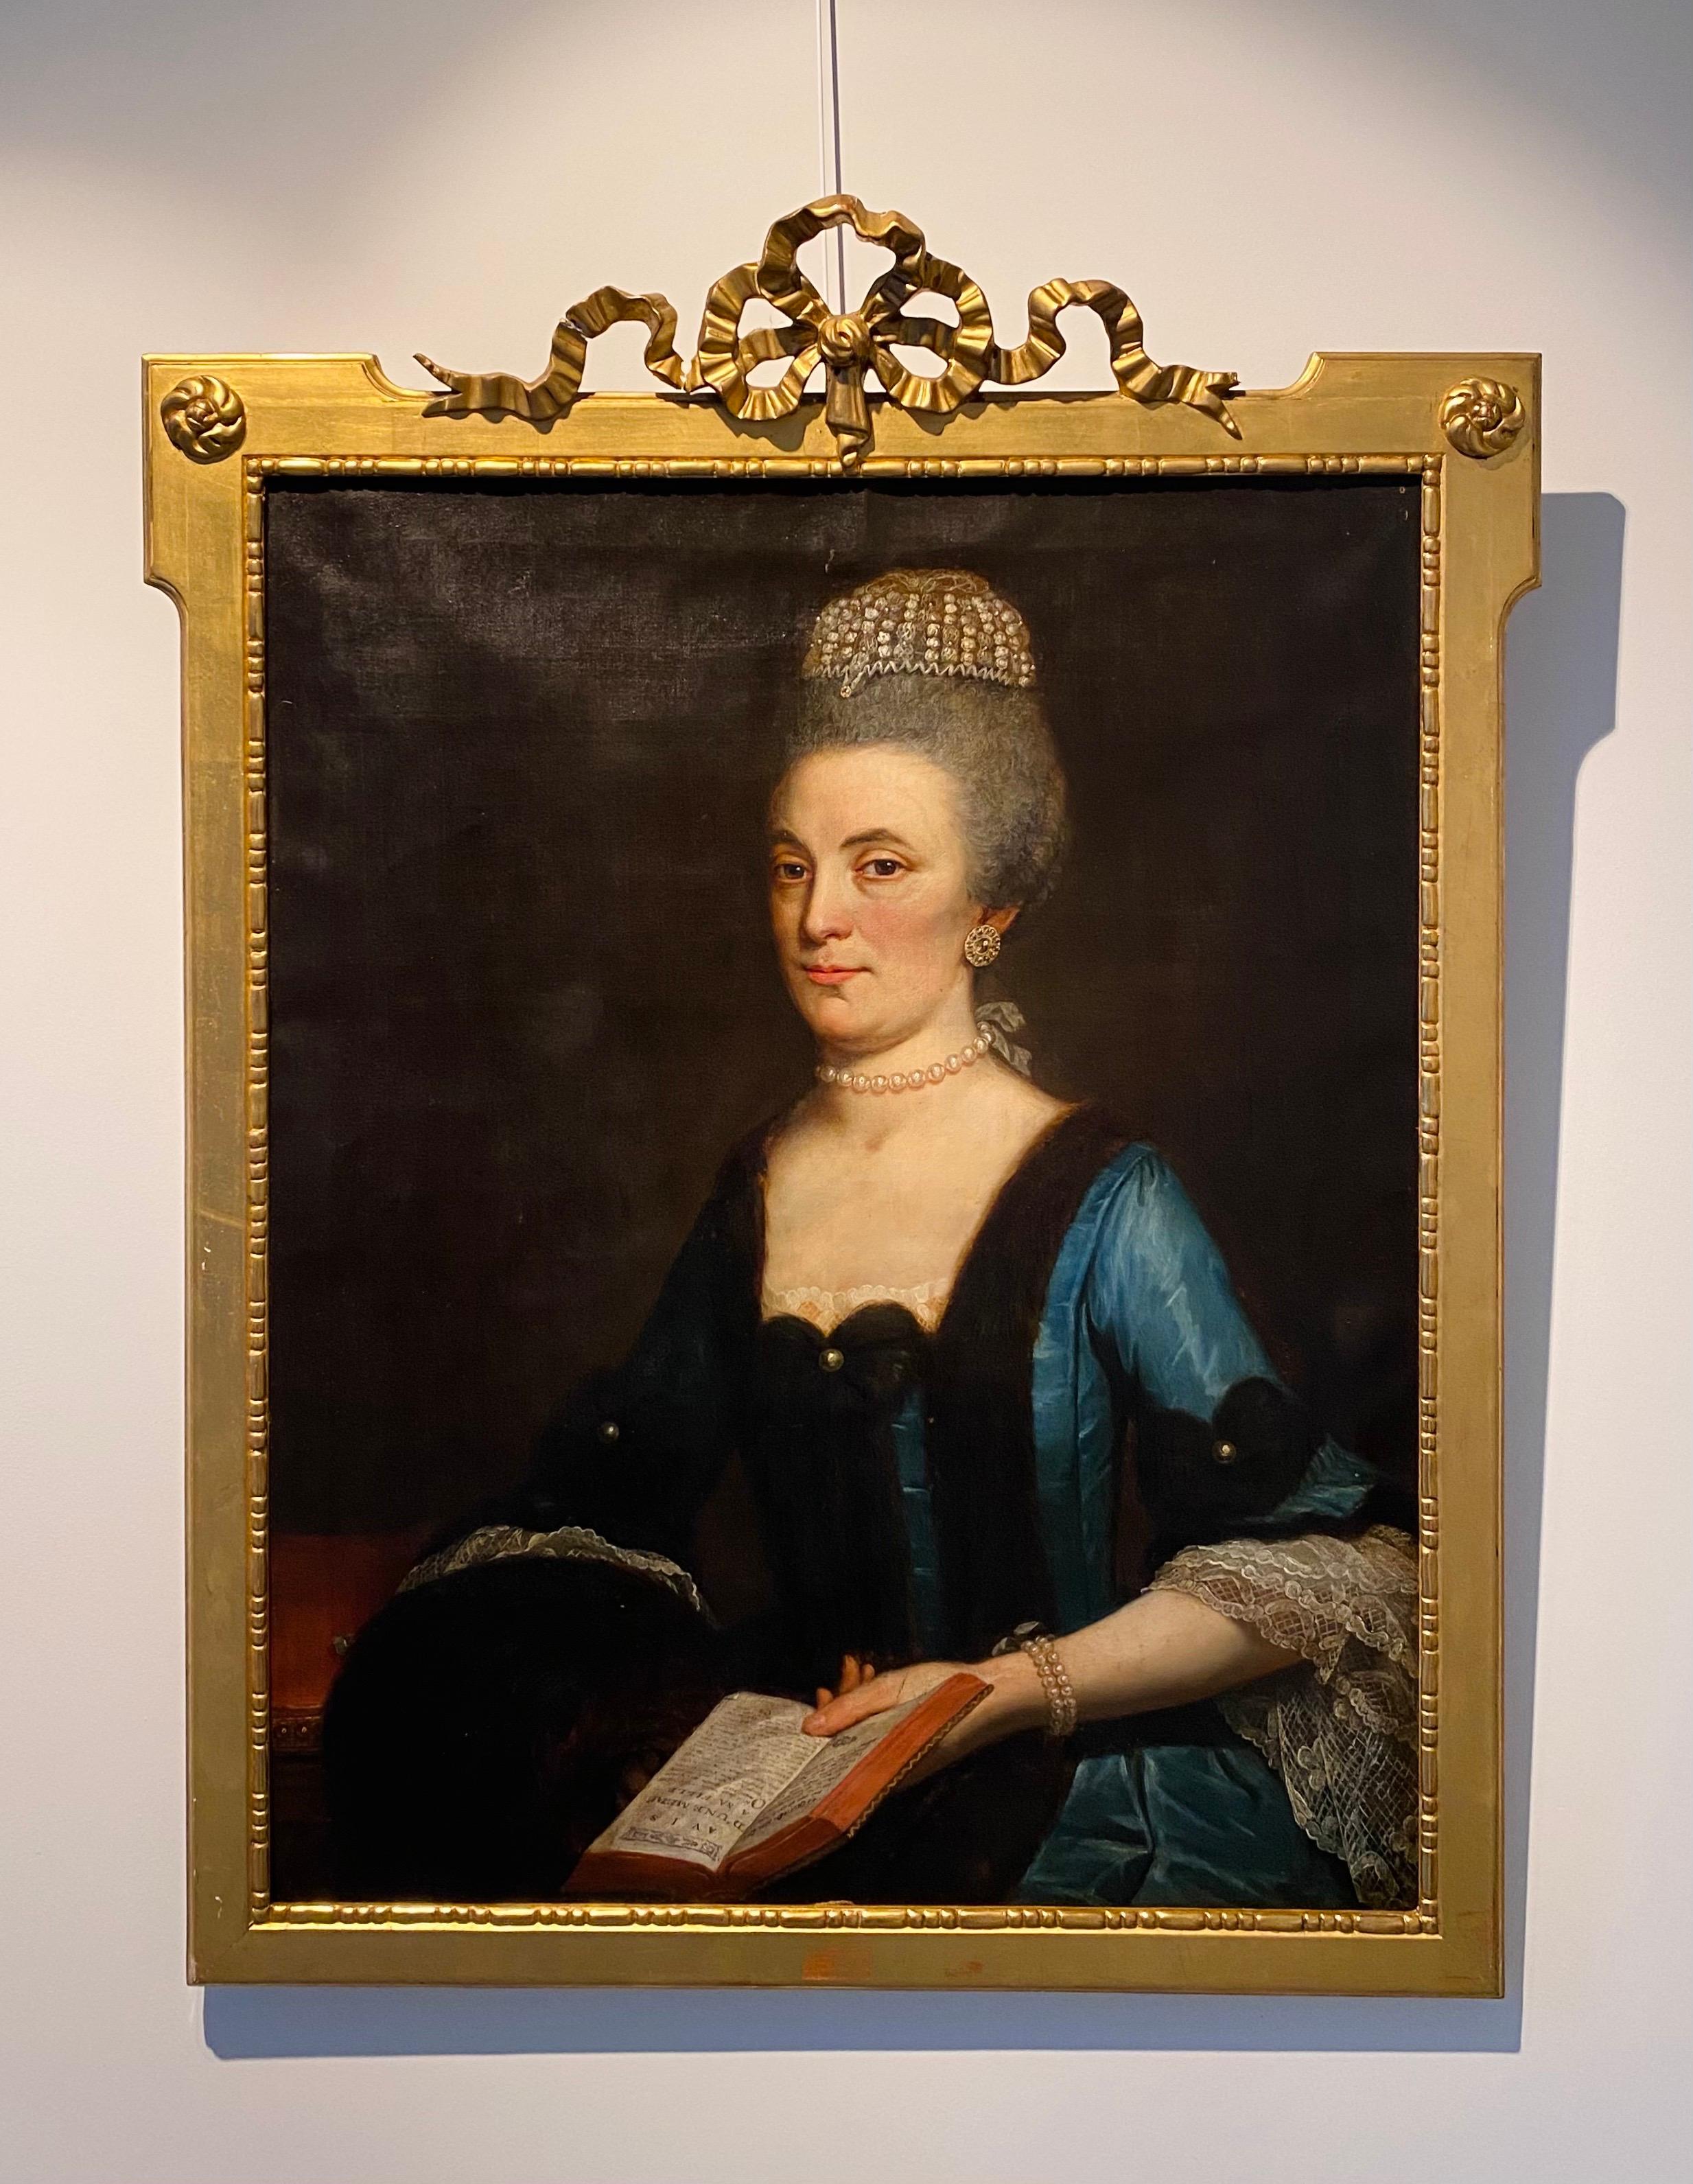 French 18th century Portrait of a lady - Book pearls - Painting by Donatien Nonotte (Besançon 1708 - Lyon 1785)